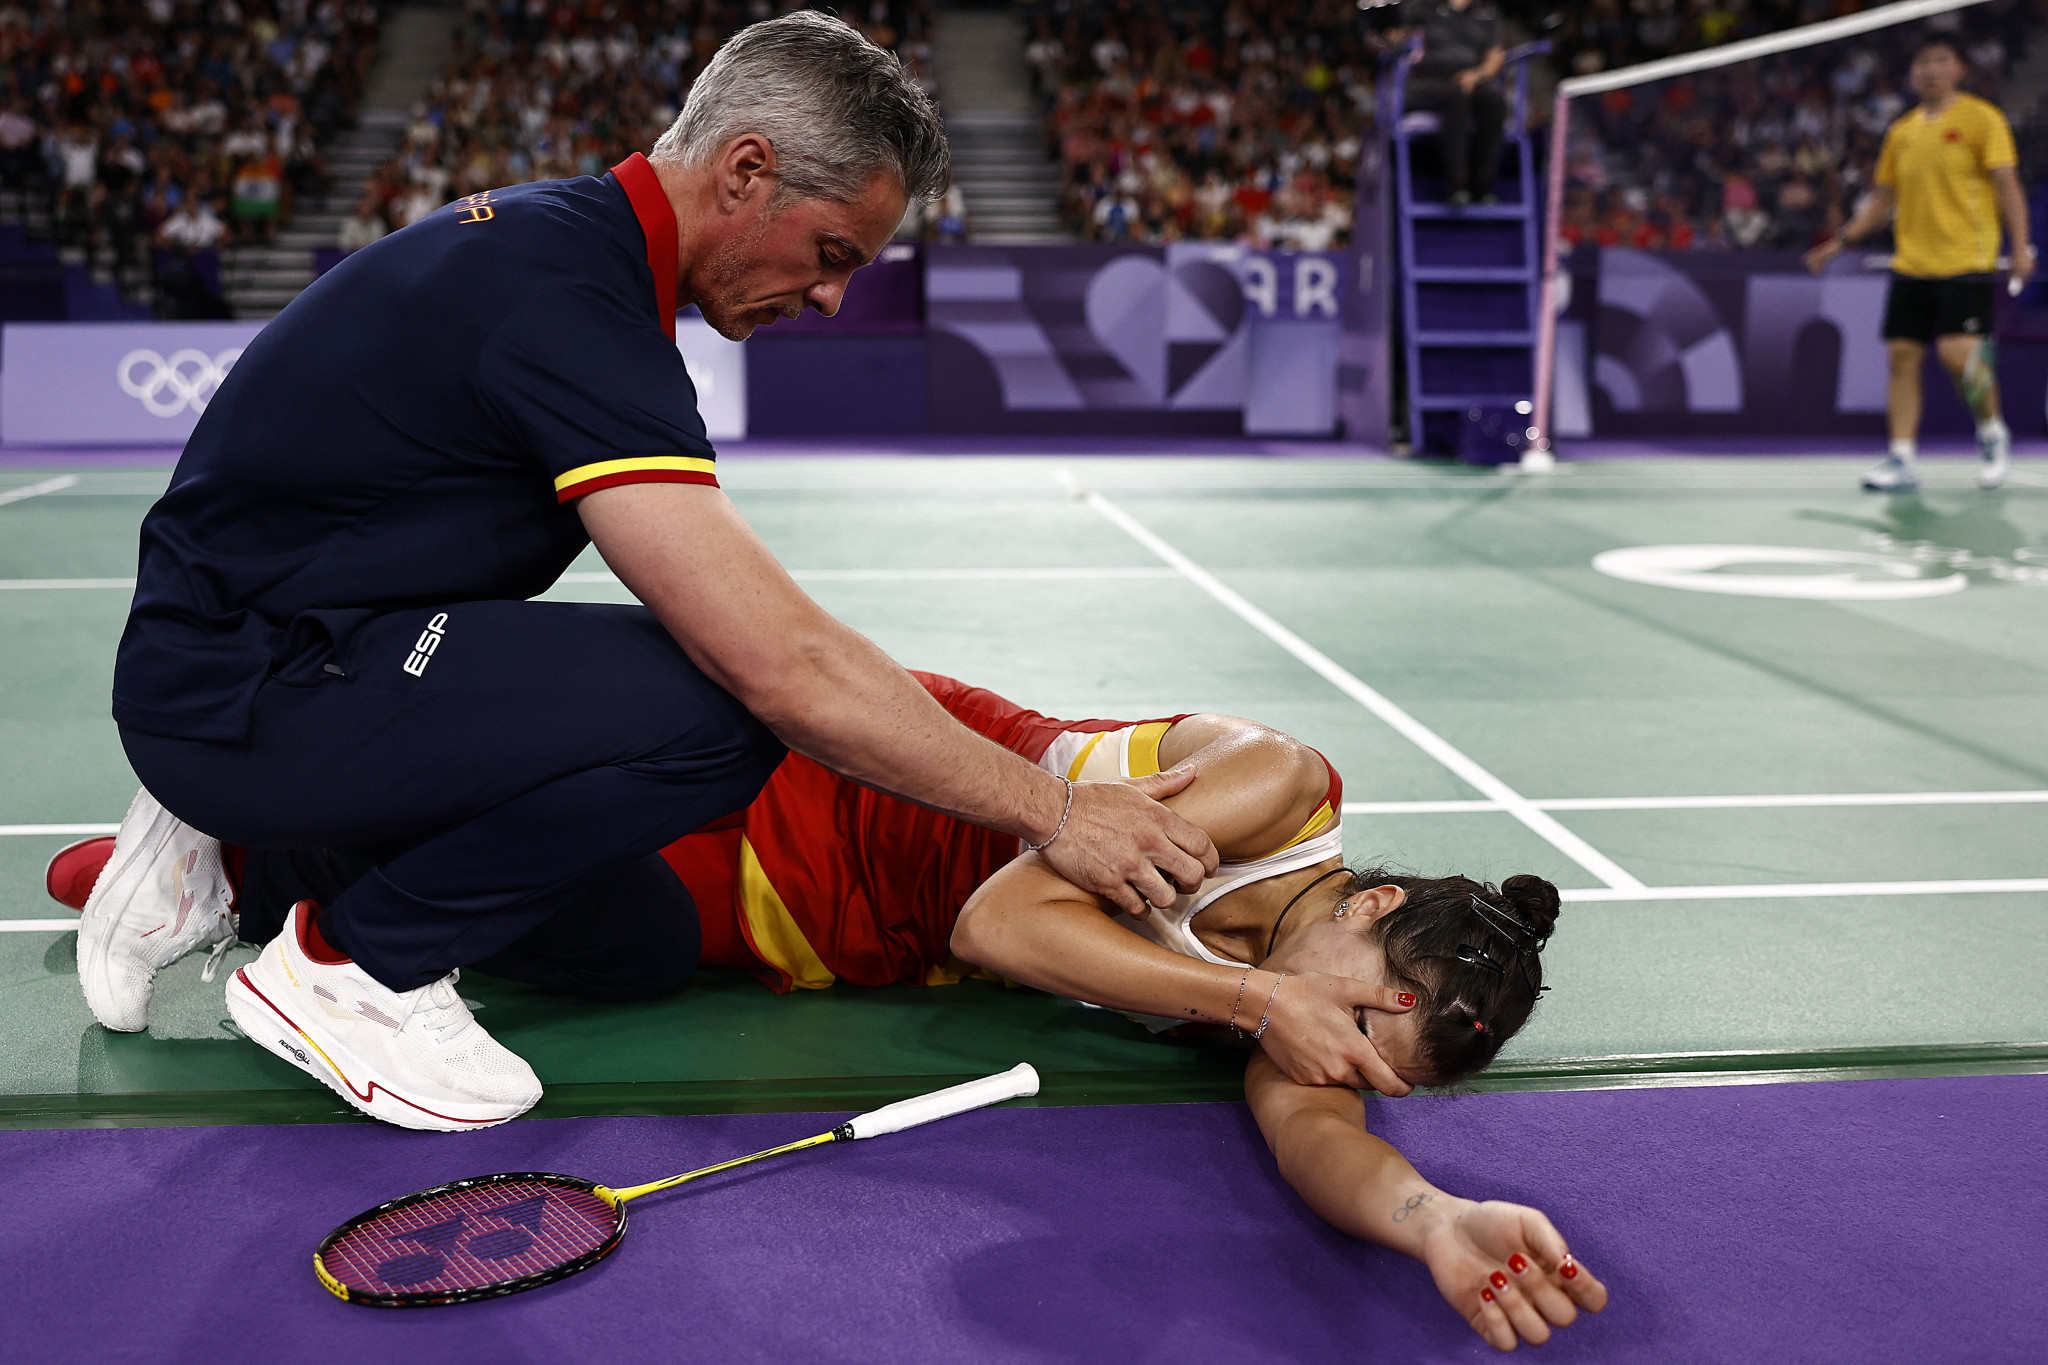 Carolina Marin is comforted by her coach while reacting from her injury in the women's singles badminton semi-final. GETTY IMAGES